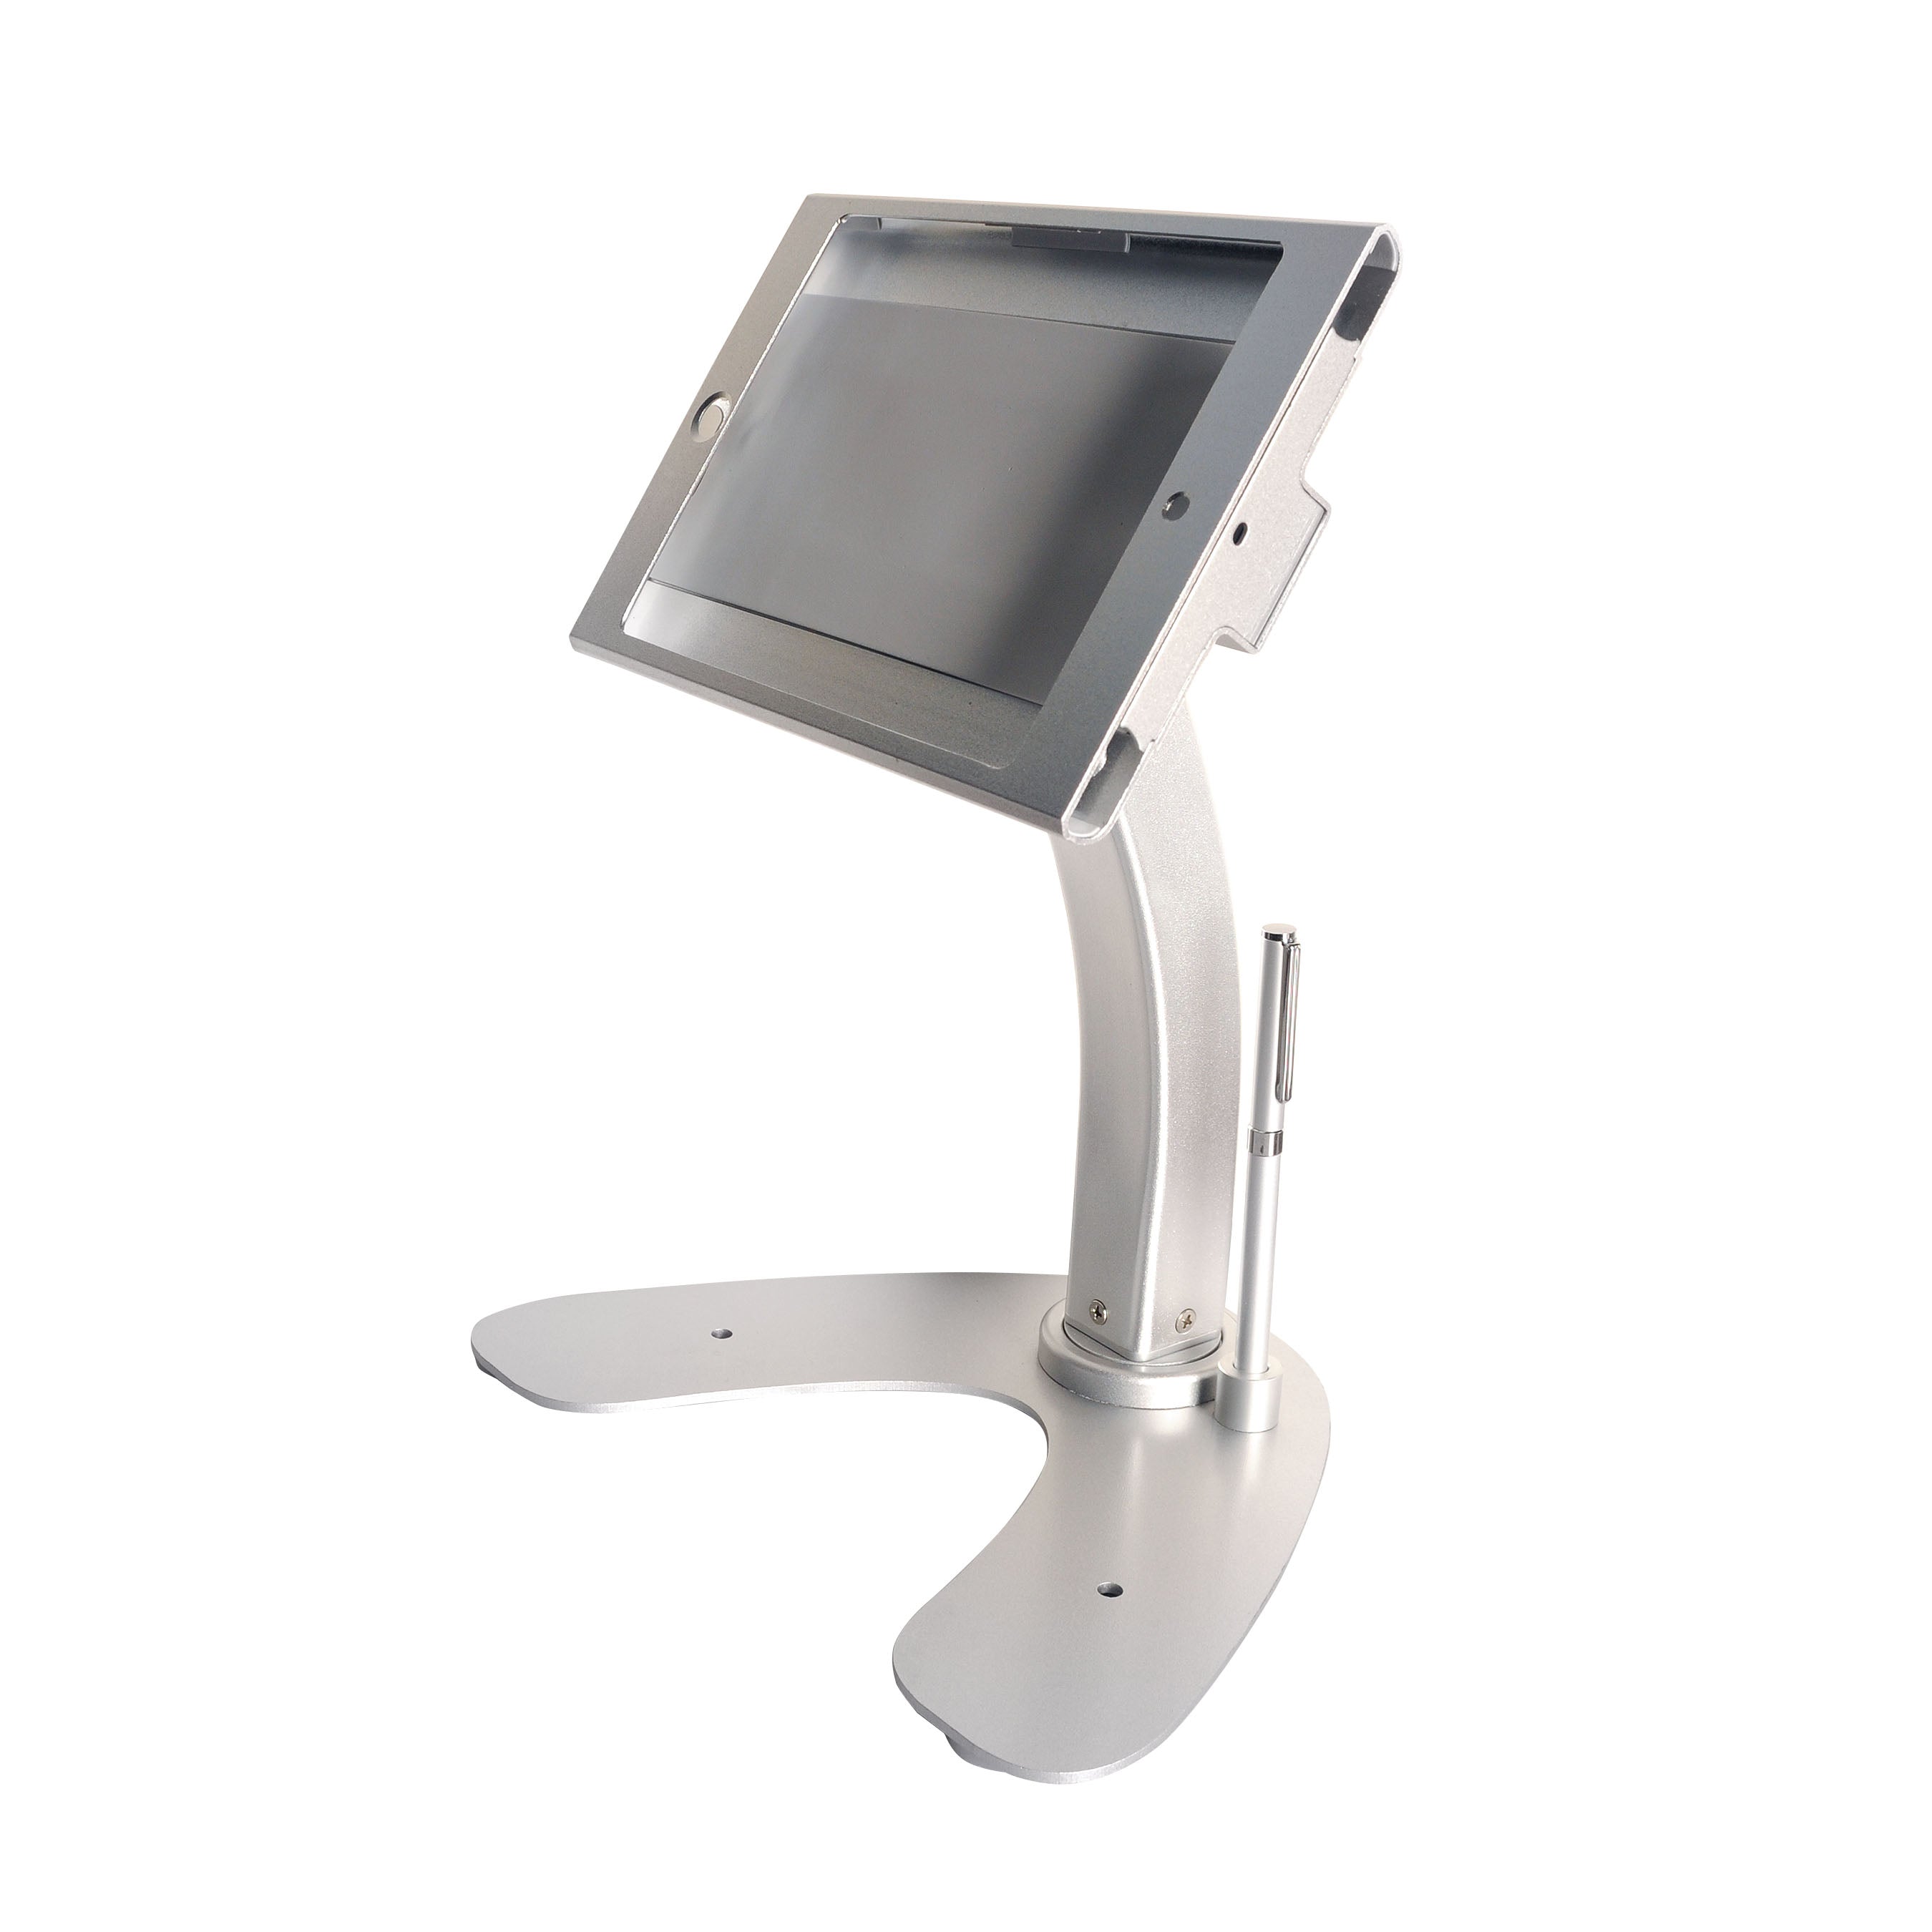 Dual Security Kiosk Stand with Locking Case and Cable for iPad mini Gen. 1-5